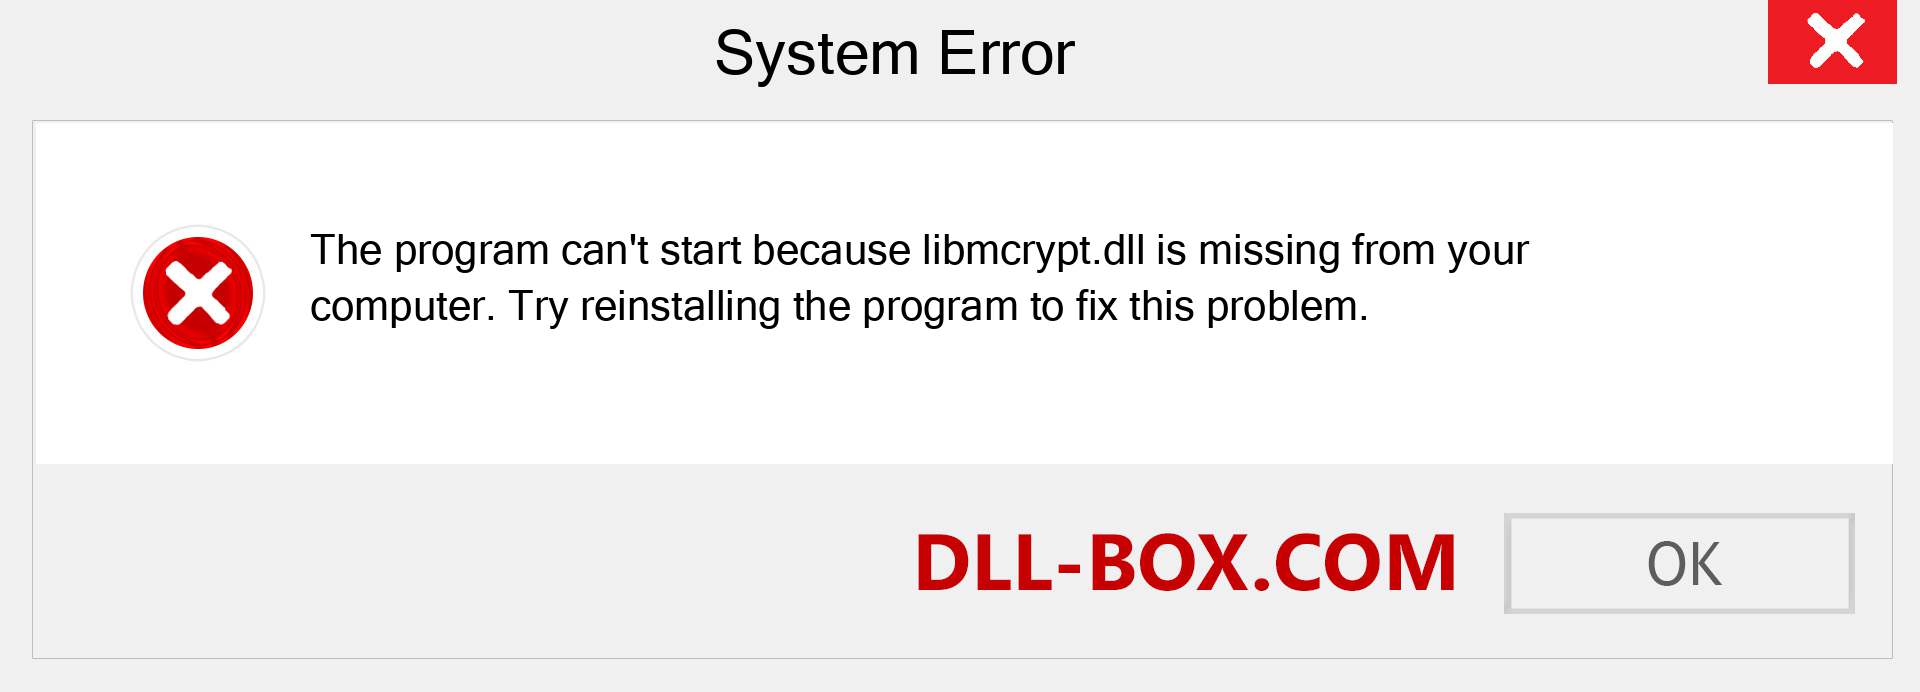  libmcrypt.dll file is missing?. Download for Windows 7, 8, 10 - Fix  libmcrypt dll Missing Error on Windows, photos, images